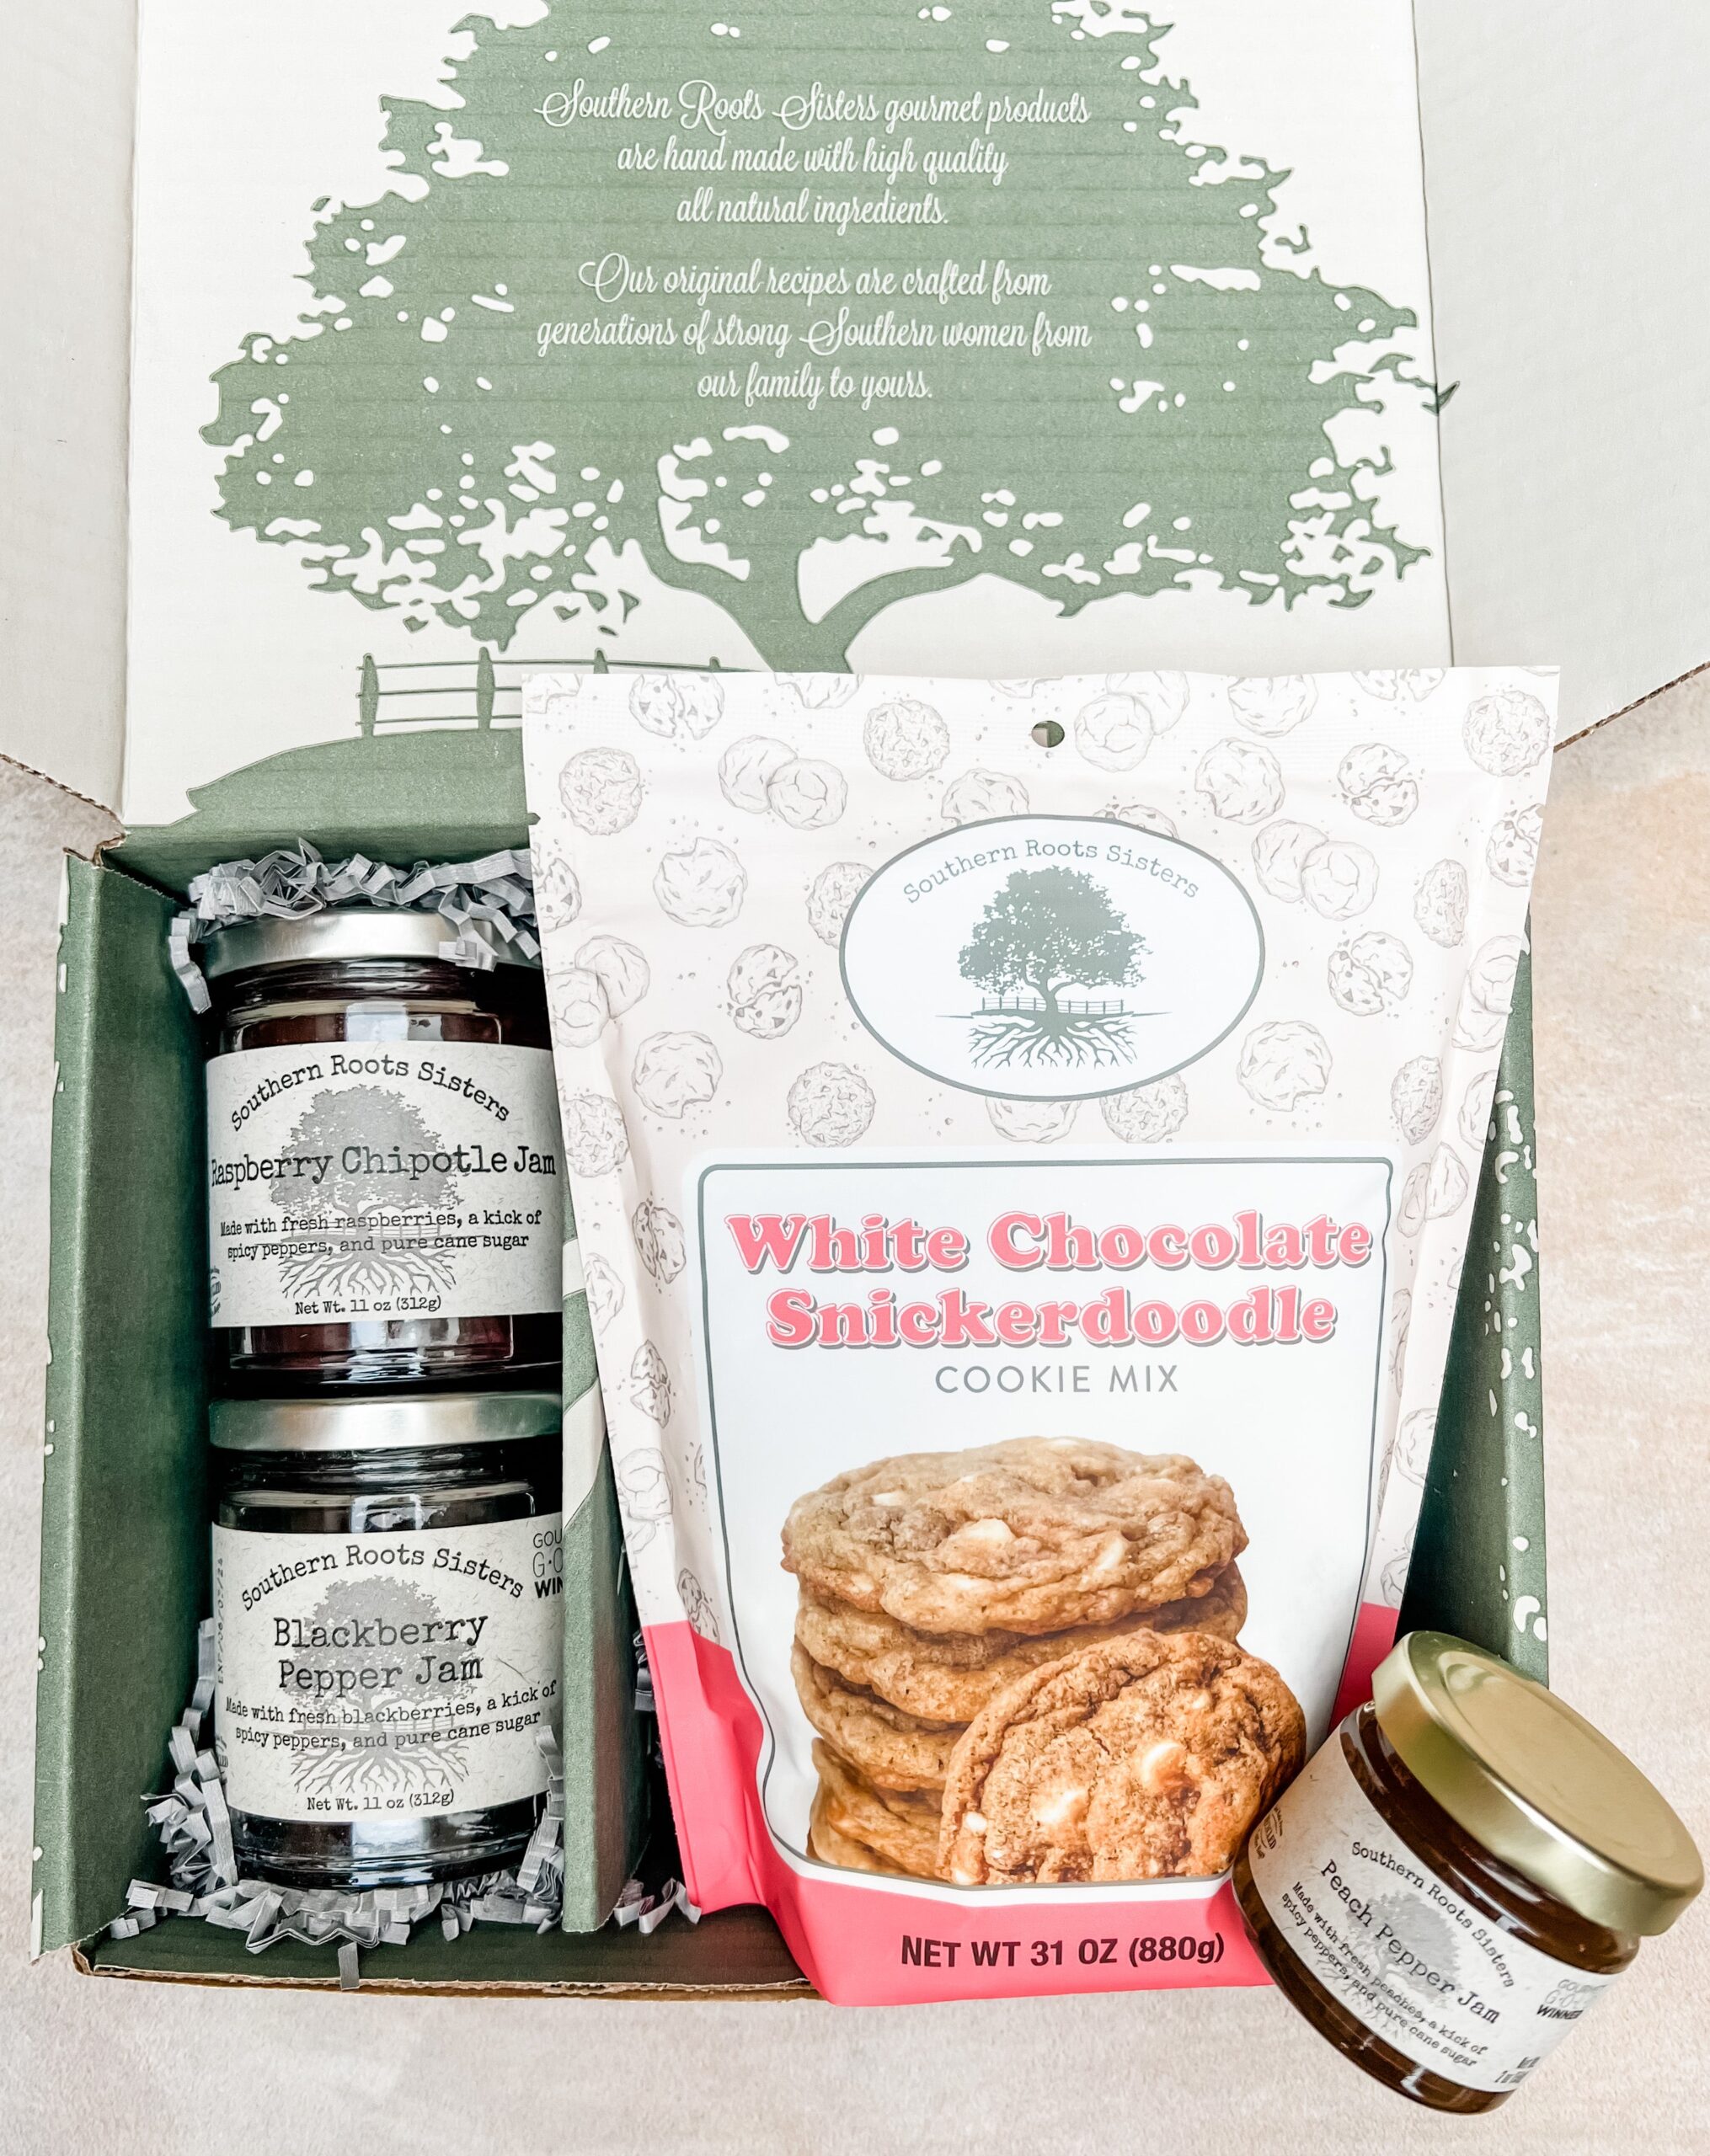 Southern Roots Sisters Raspberry and Blackberry Jam and Cookies Gift Set